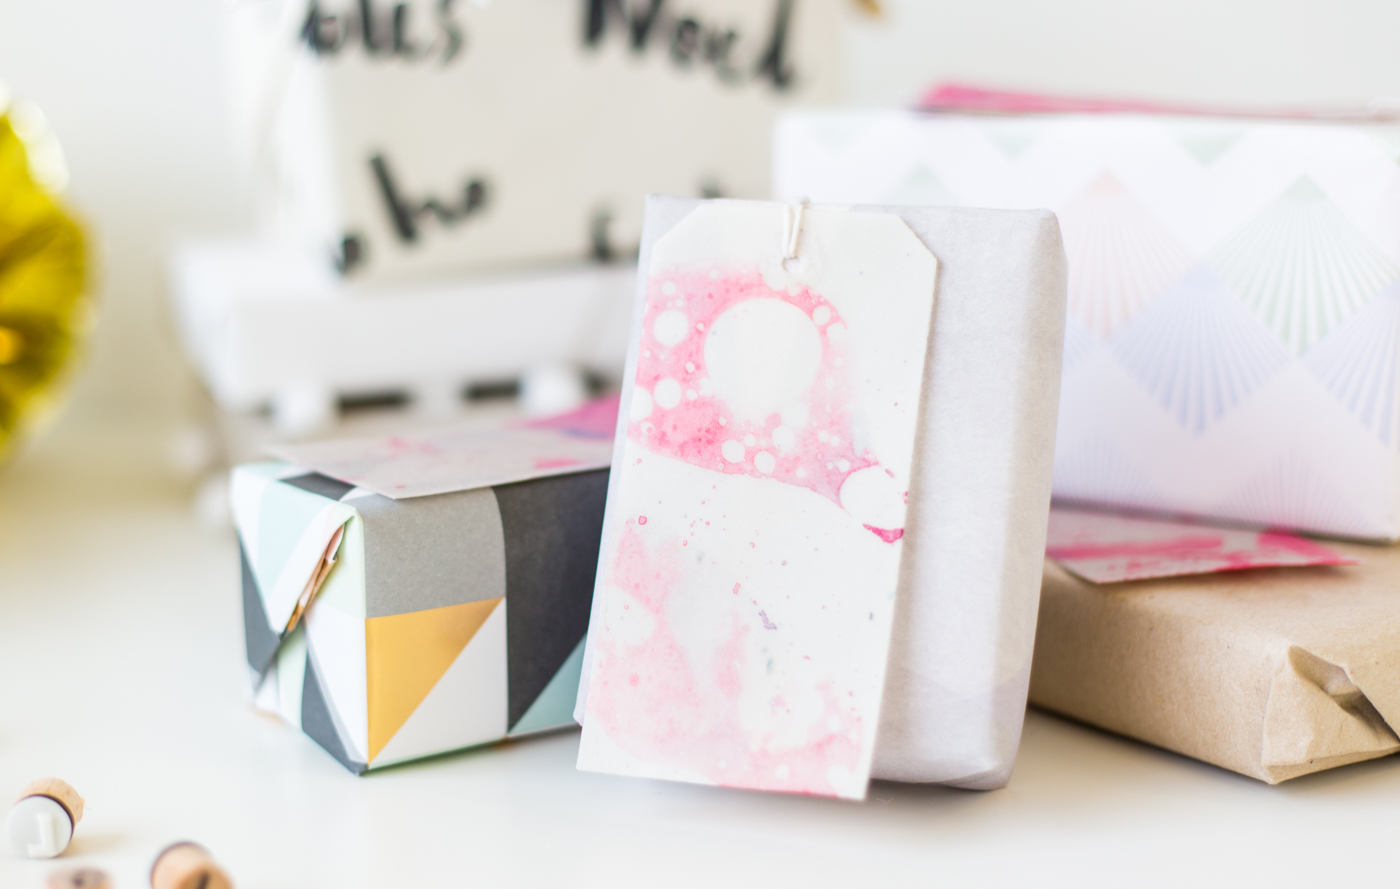 DIY Marbled Gift Labels tutorial with Dulux | @fallfordiy